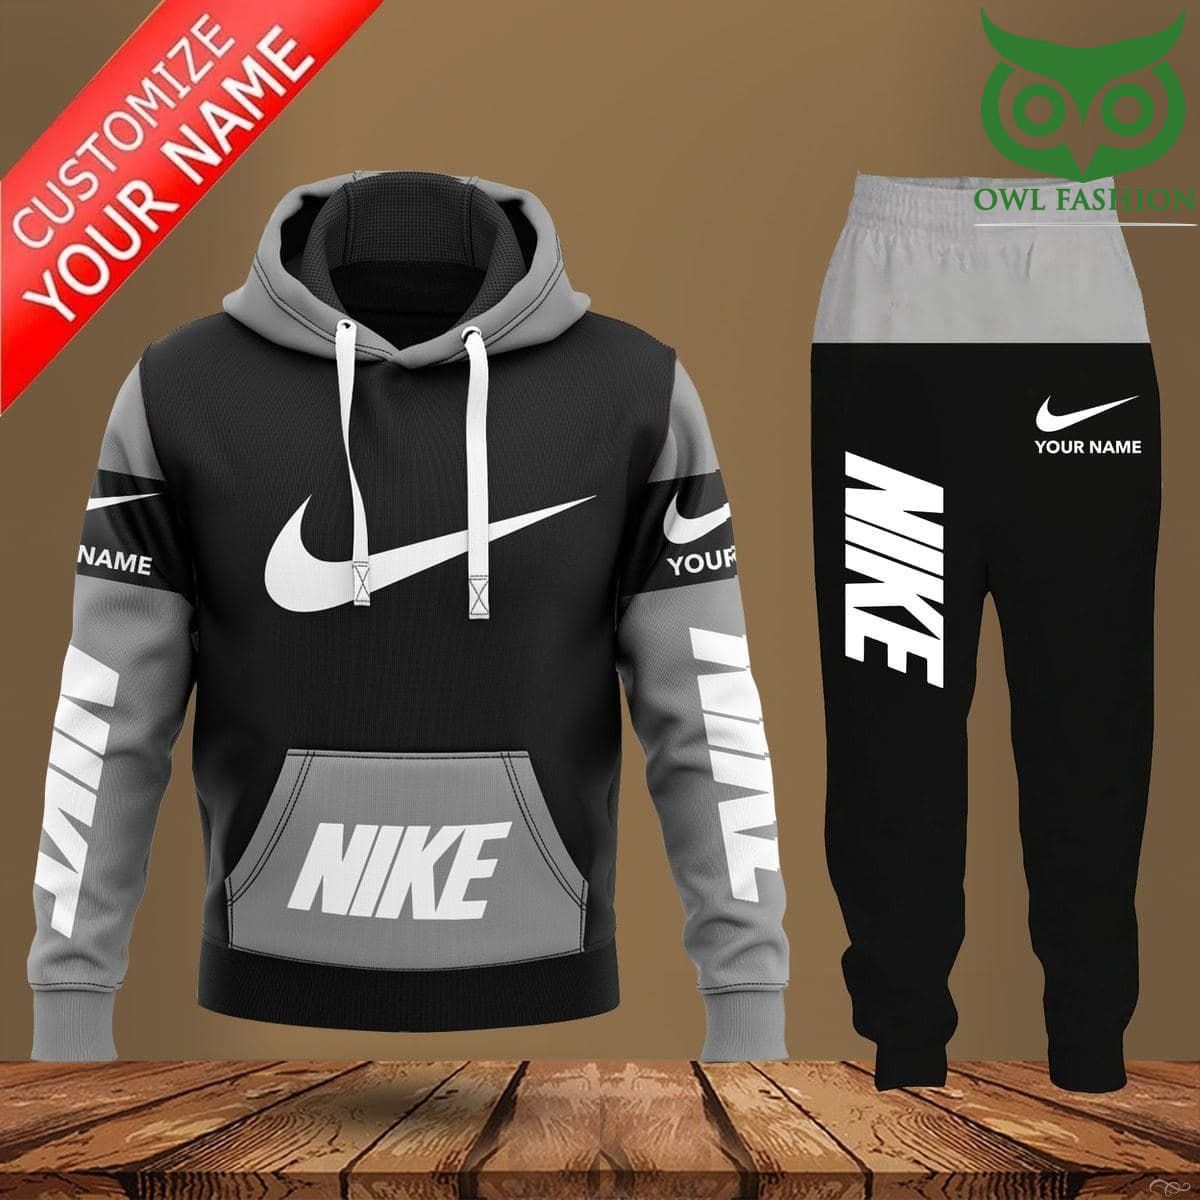 Personalized Nike black and grey hightlight hoodies and sweatpants